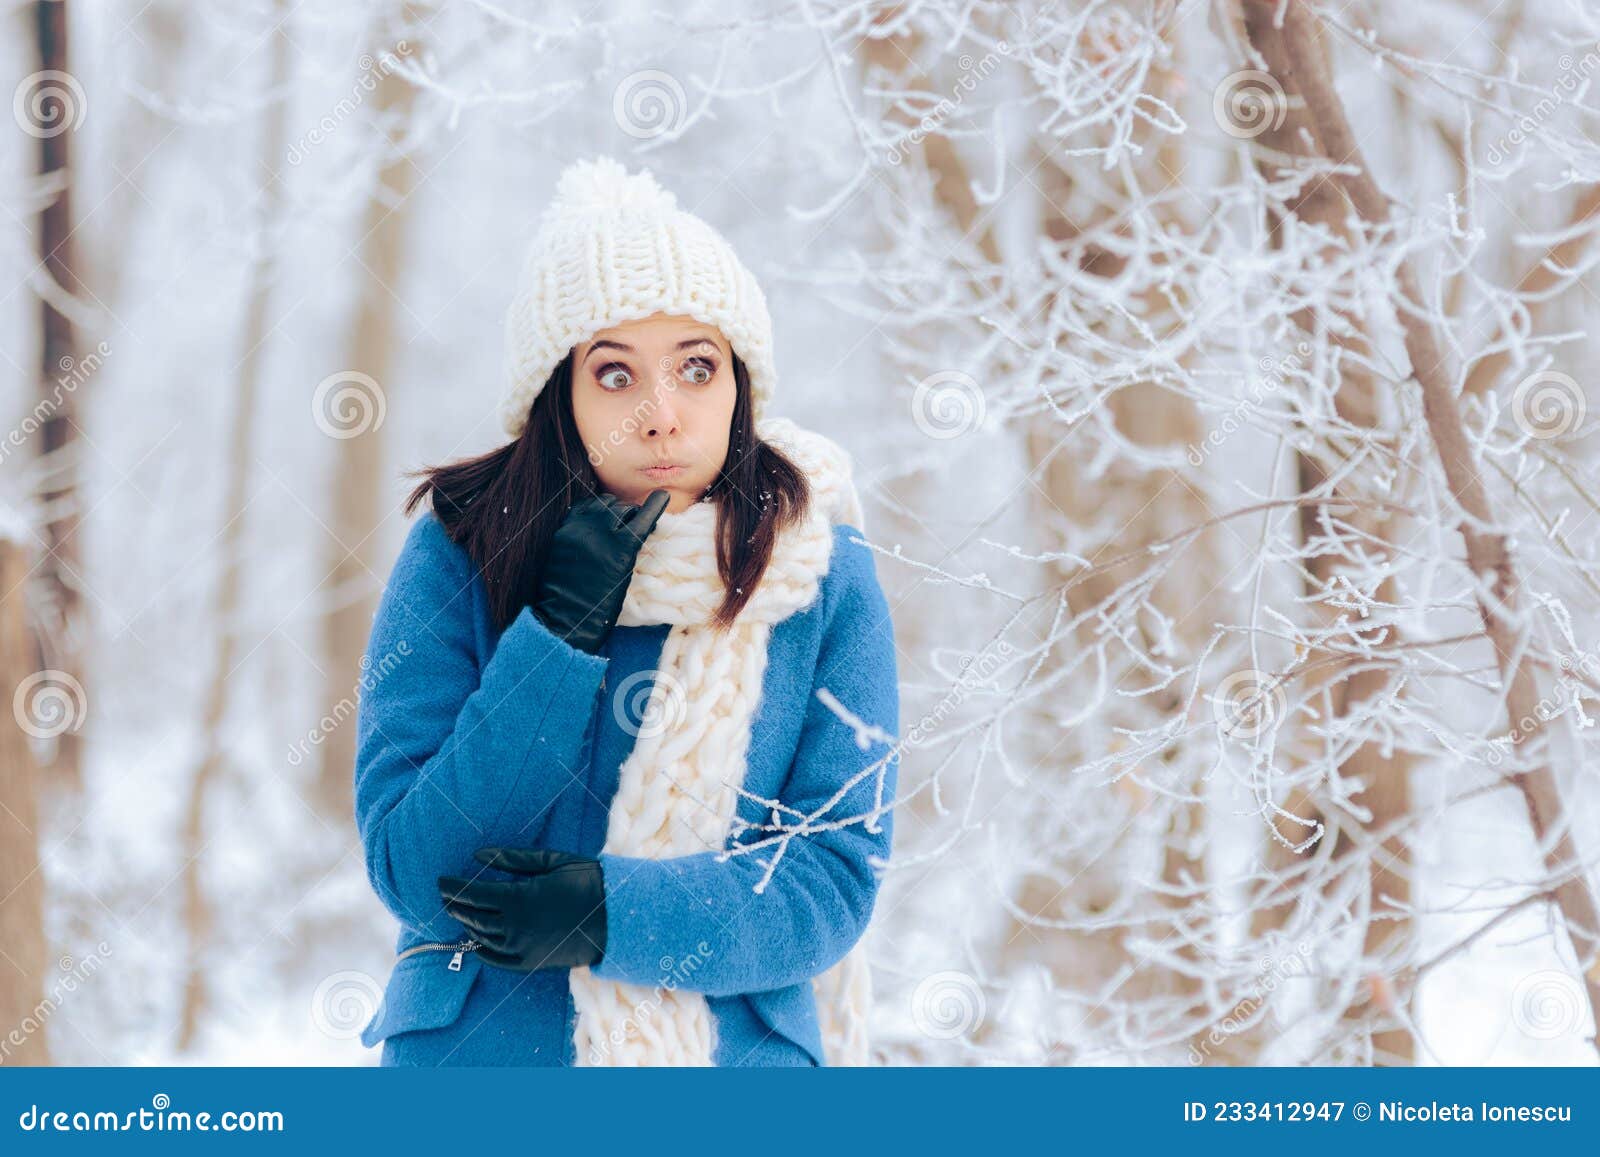 Woman Freezing Outdoors in Cold Winter Weather Stock Image - Image of ...